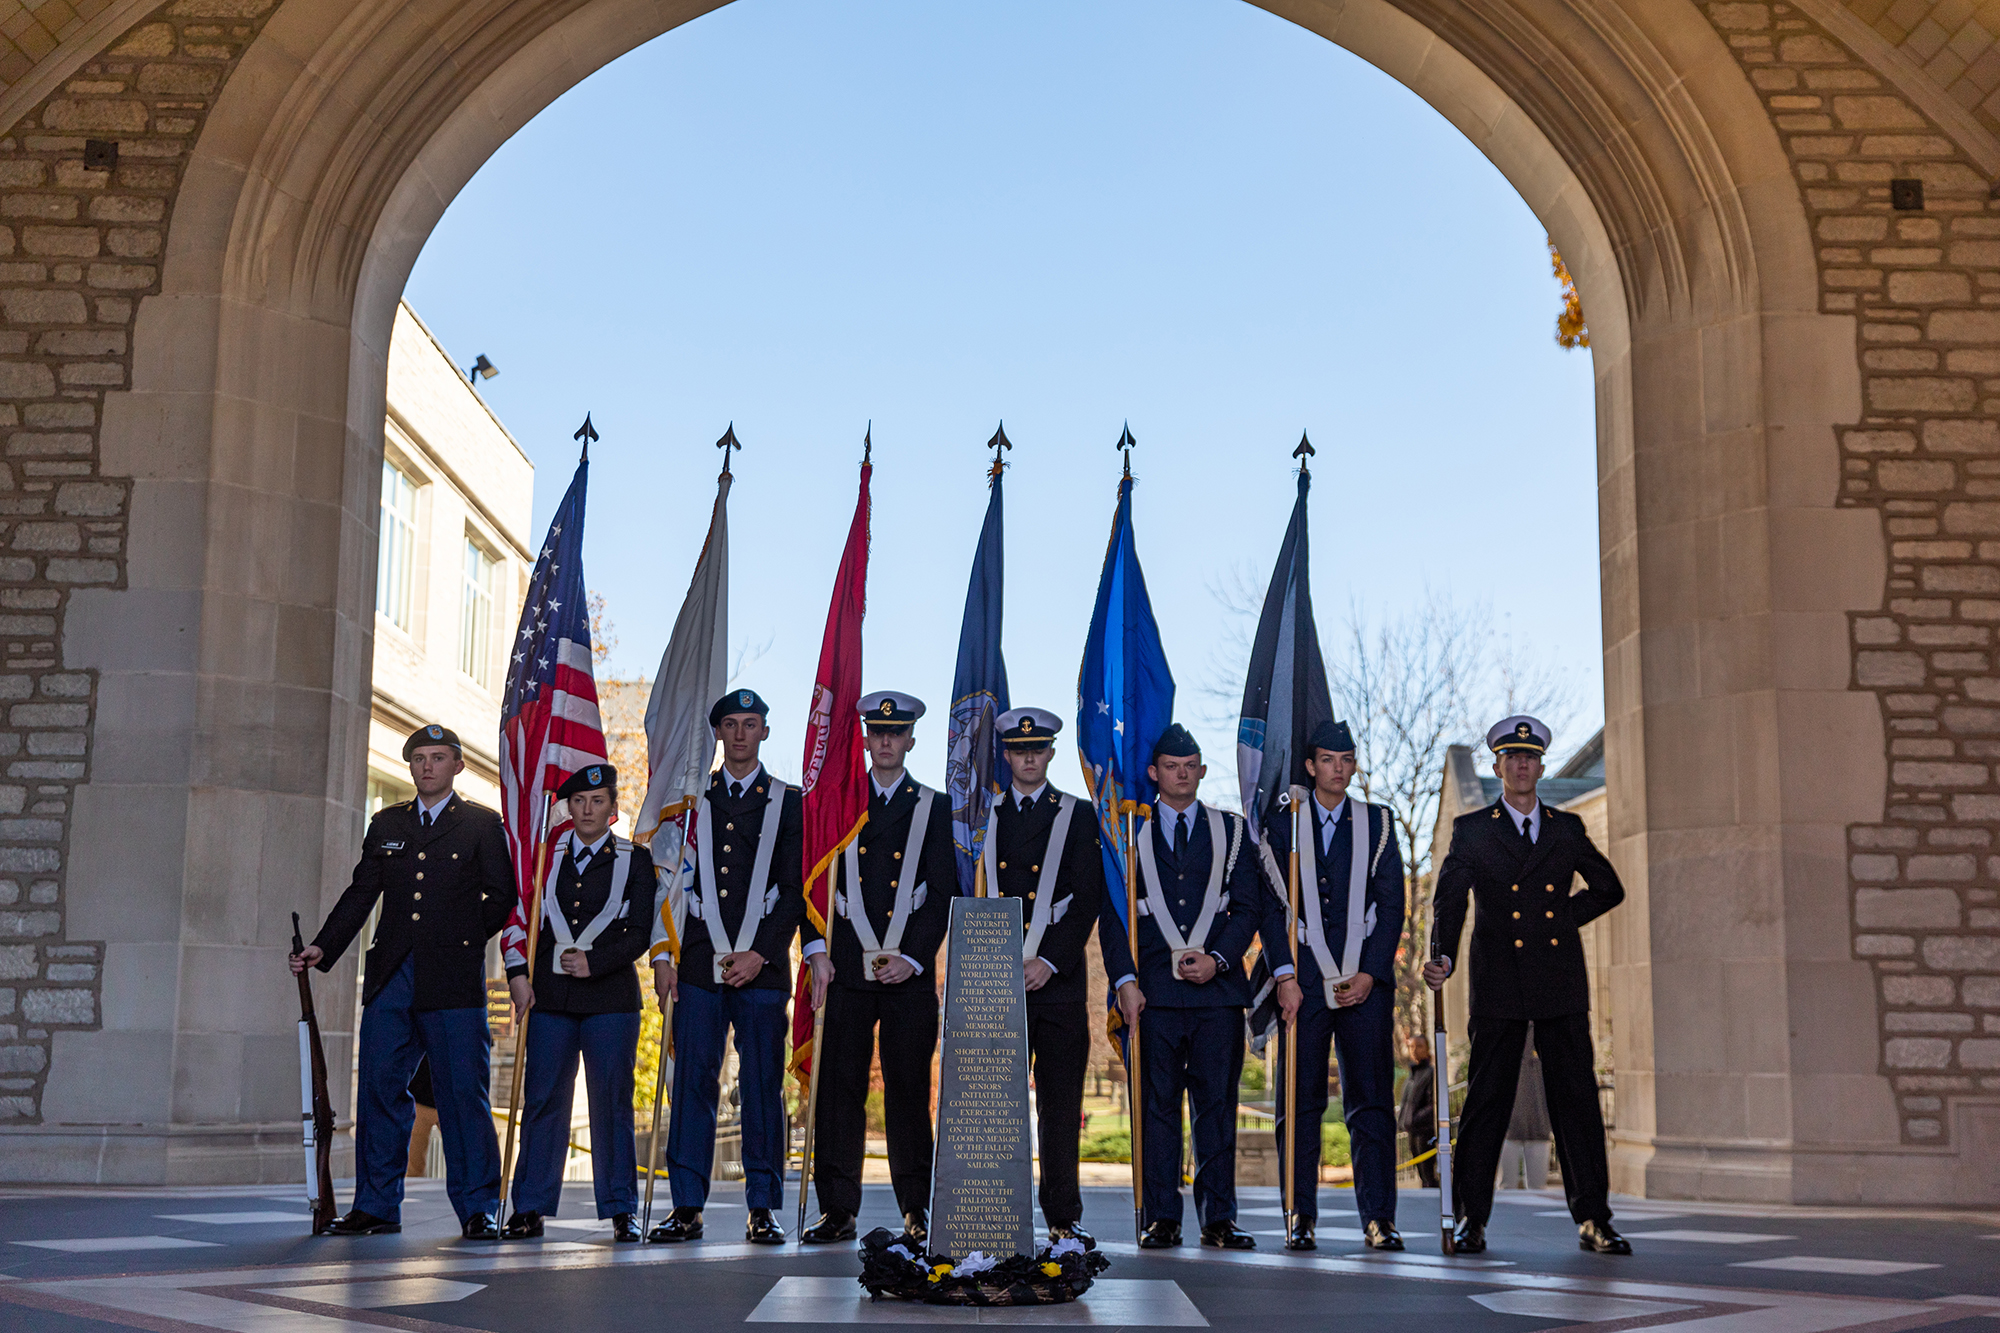 photo of rotc flag group in the memorial union archway